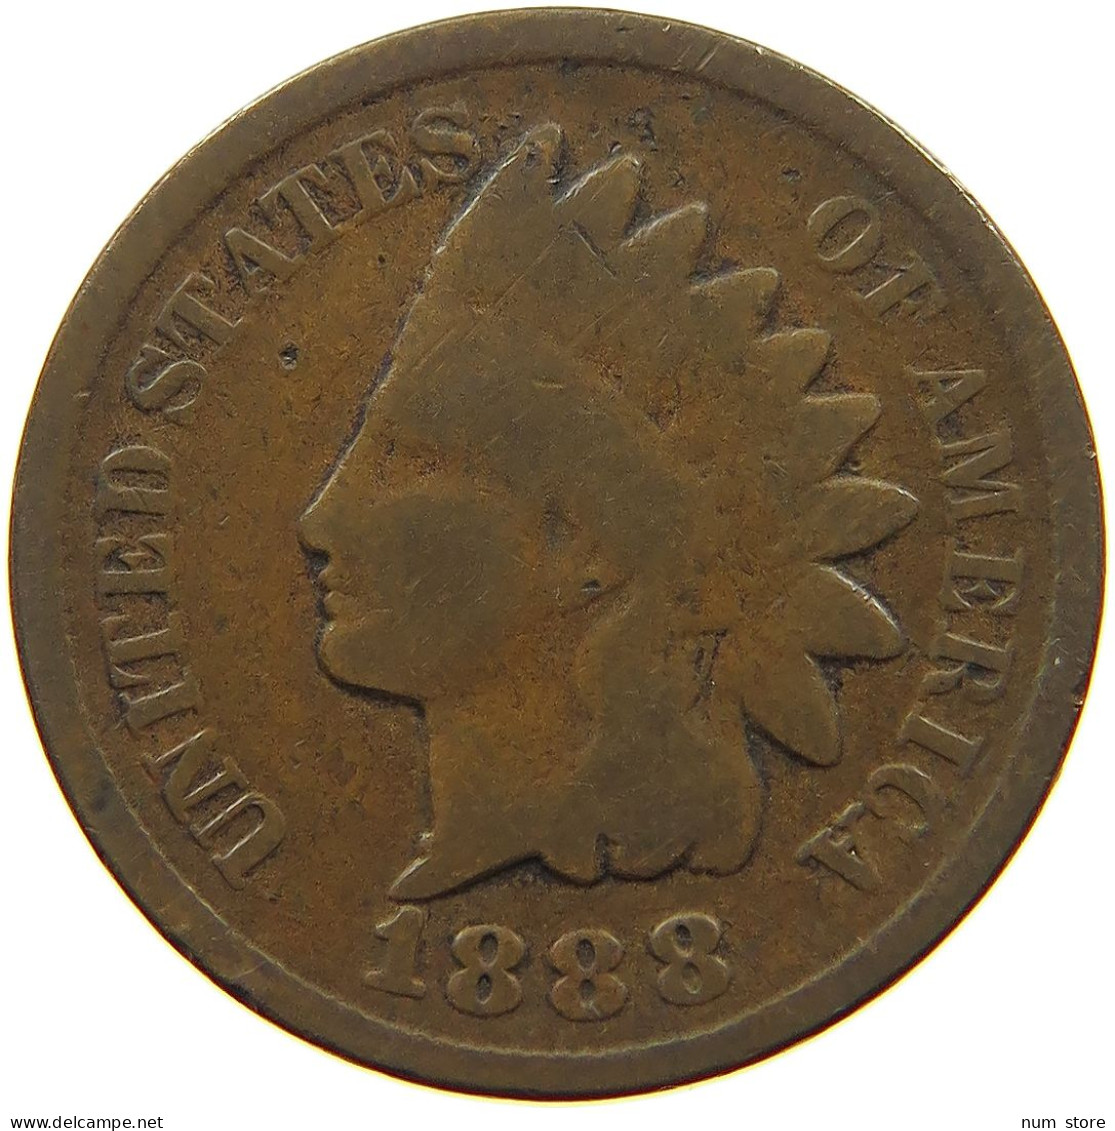 UNITED STATES OF AMERICA CENT 1888 INDIAN HEAD #s063 0049 - 1859-1909: Indian Head